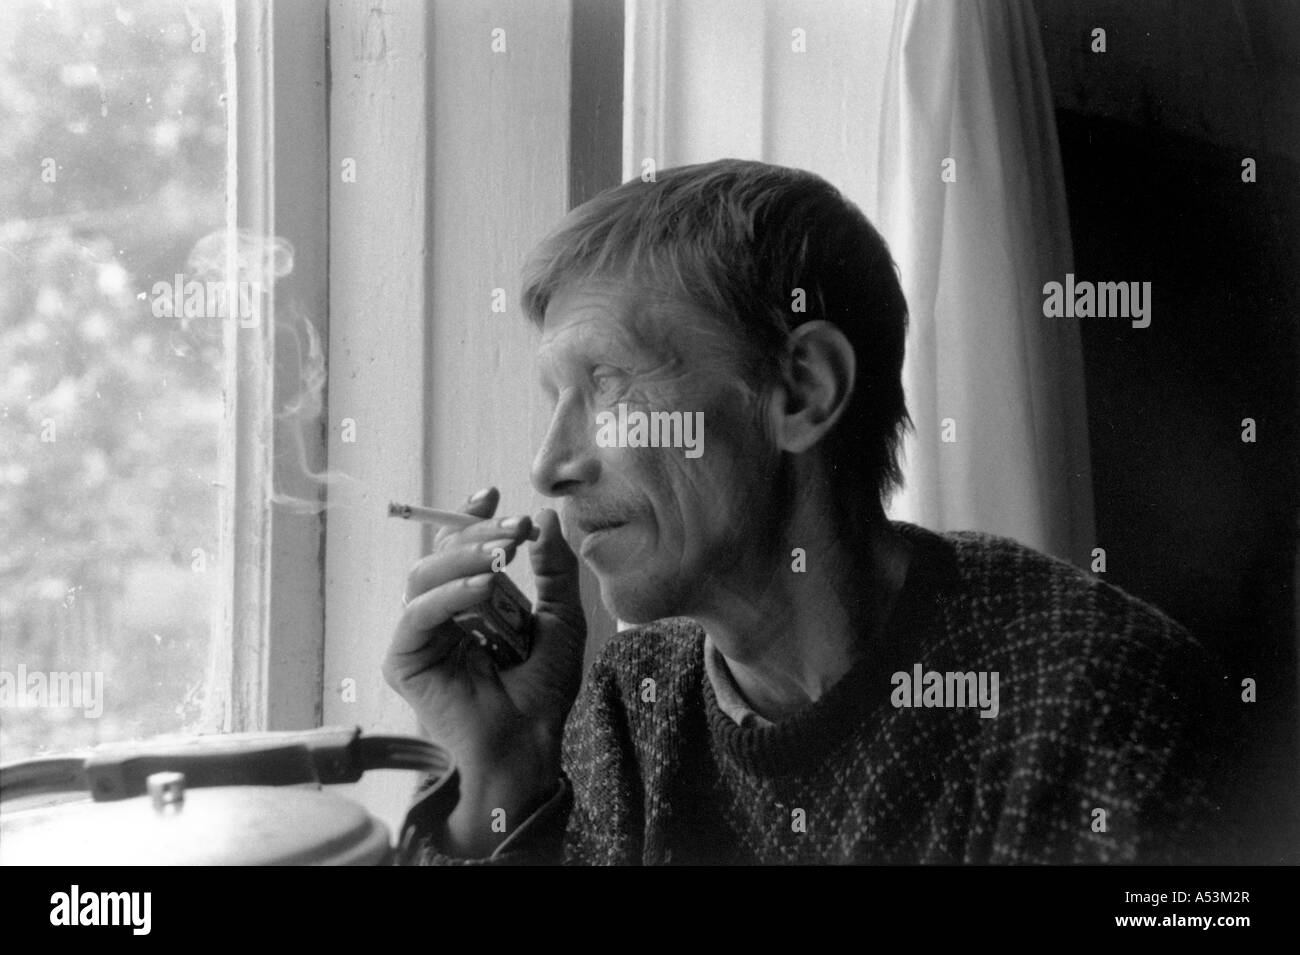 Painet ha1354 154 black and white stress unemployed lumber worker petersburg district russia country developing nation Stock Photo